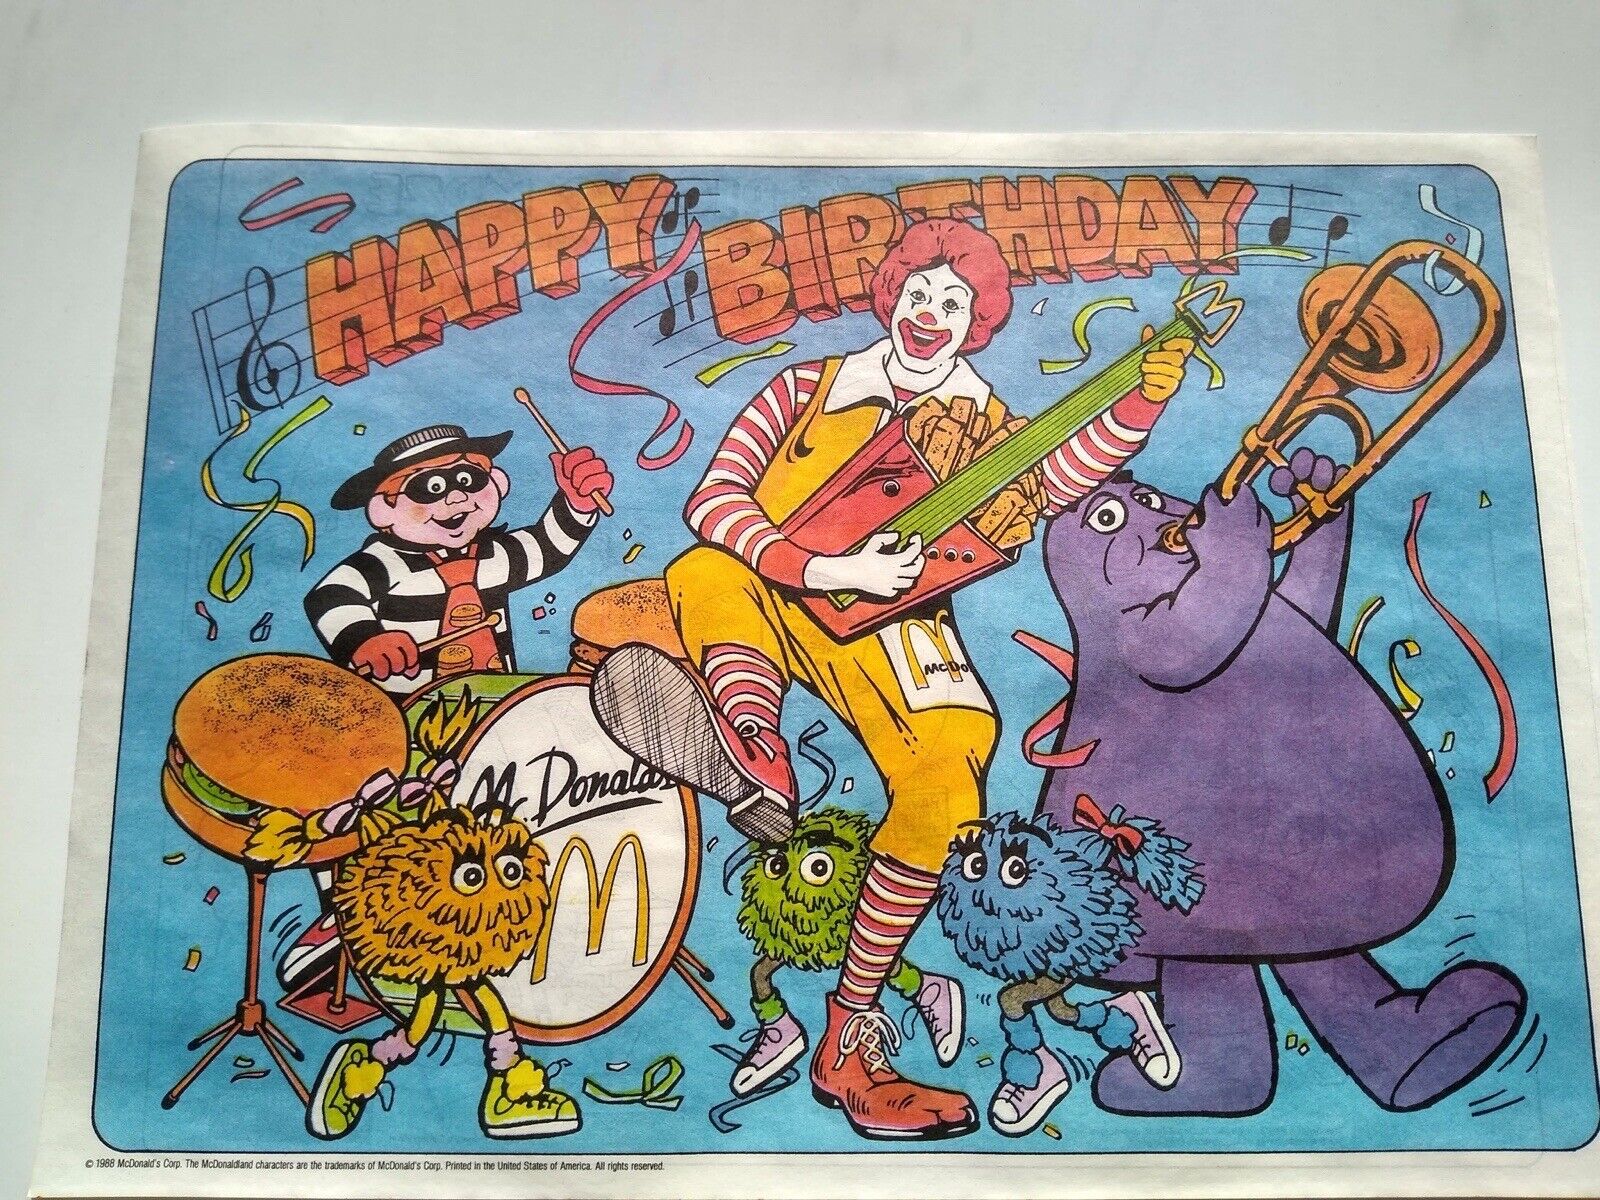 VERY HARD TO FIND, MINT Ronald McDonald, Happy Birthday Placemat - BRAND NEW